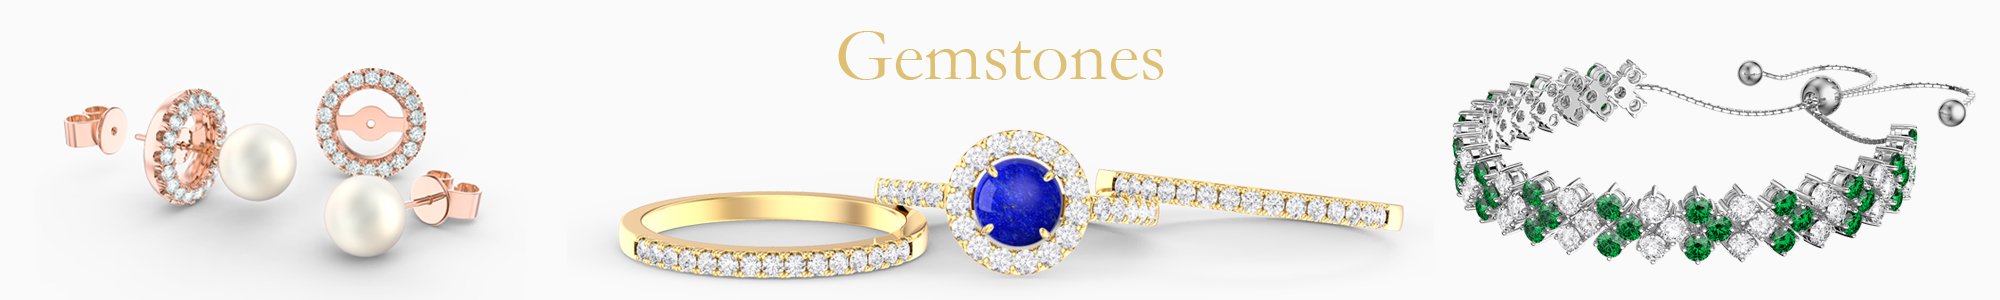 Gemstone Jewellery - from precious gemstones to Diamonds. From Silver to 18ct Gold.